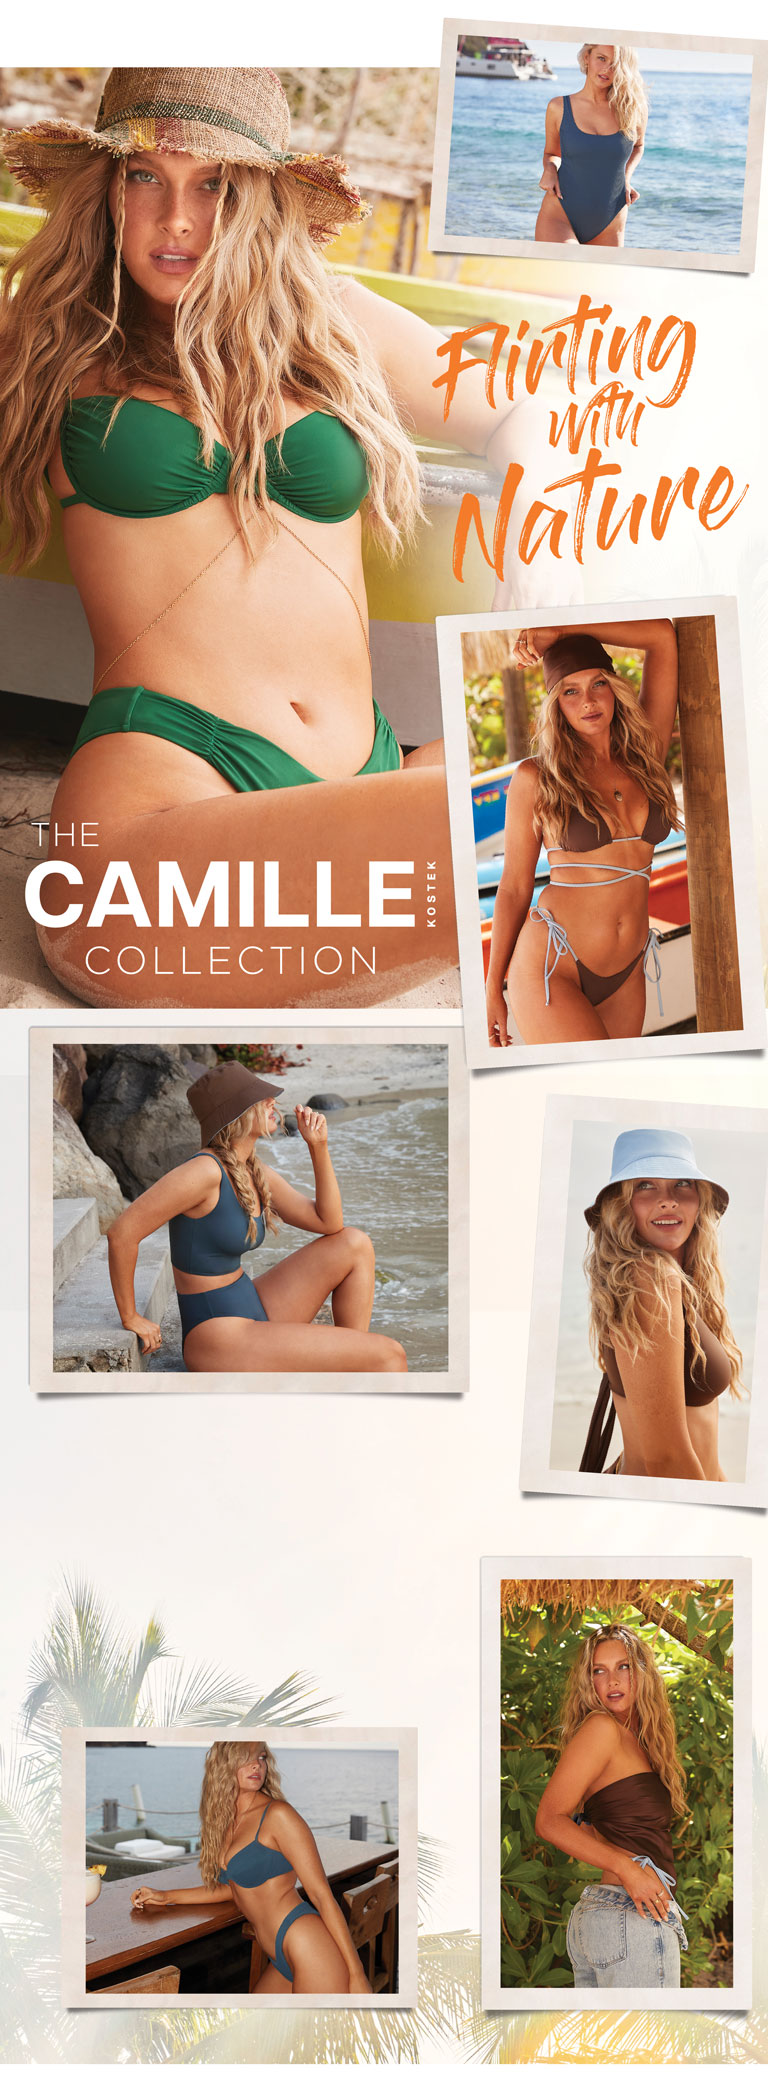 Flirting with Nature - The Camille Kostek Collection